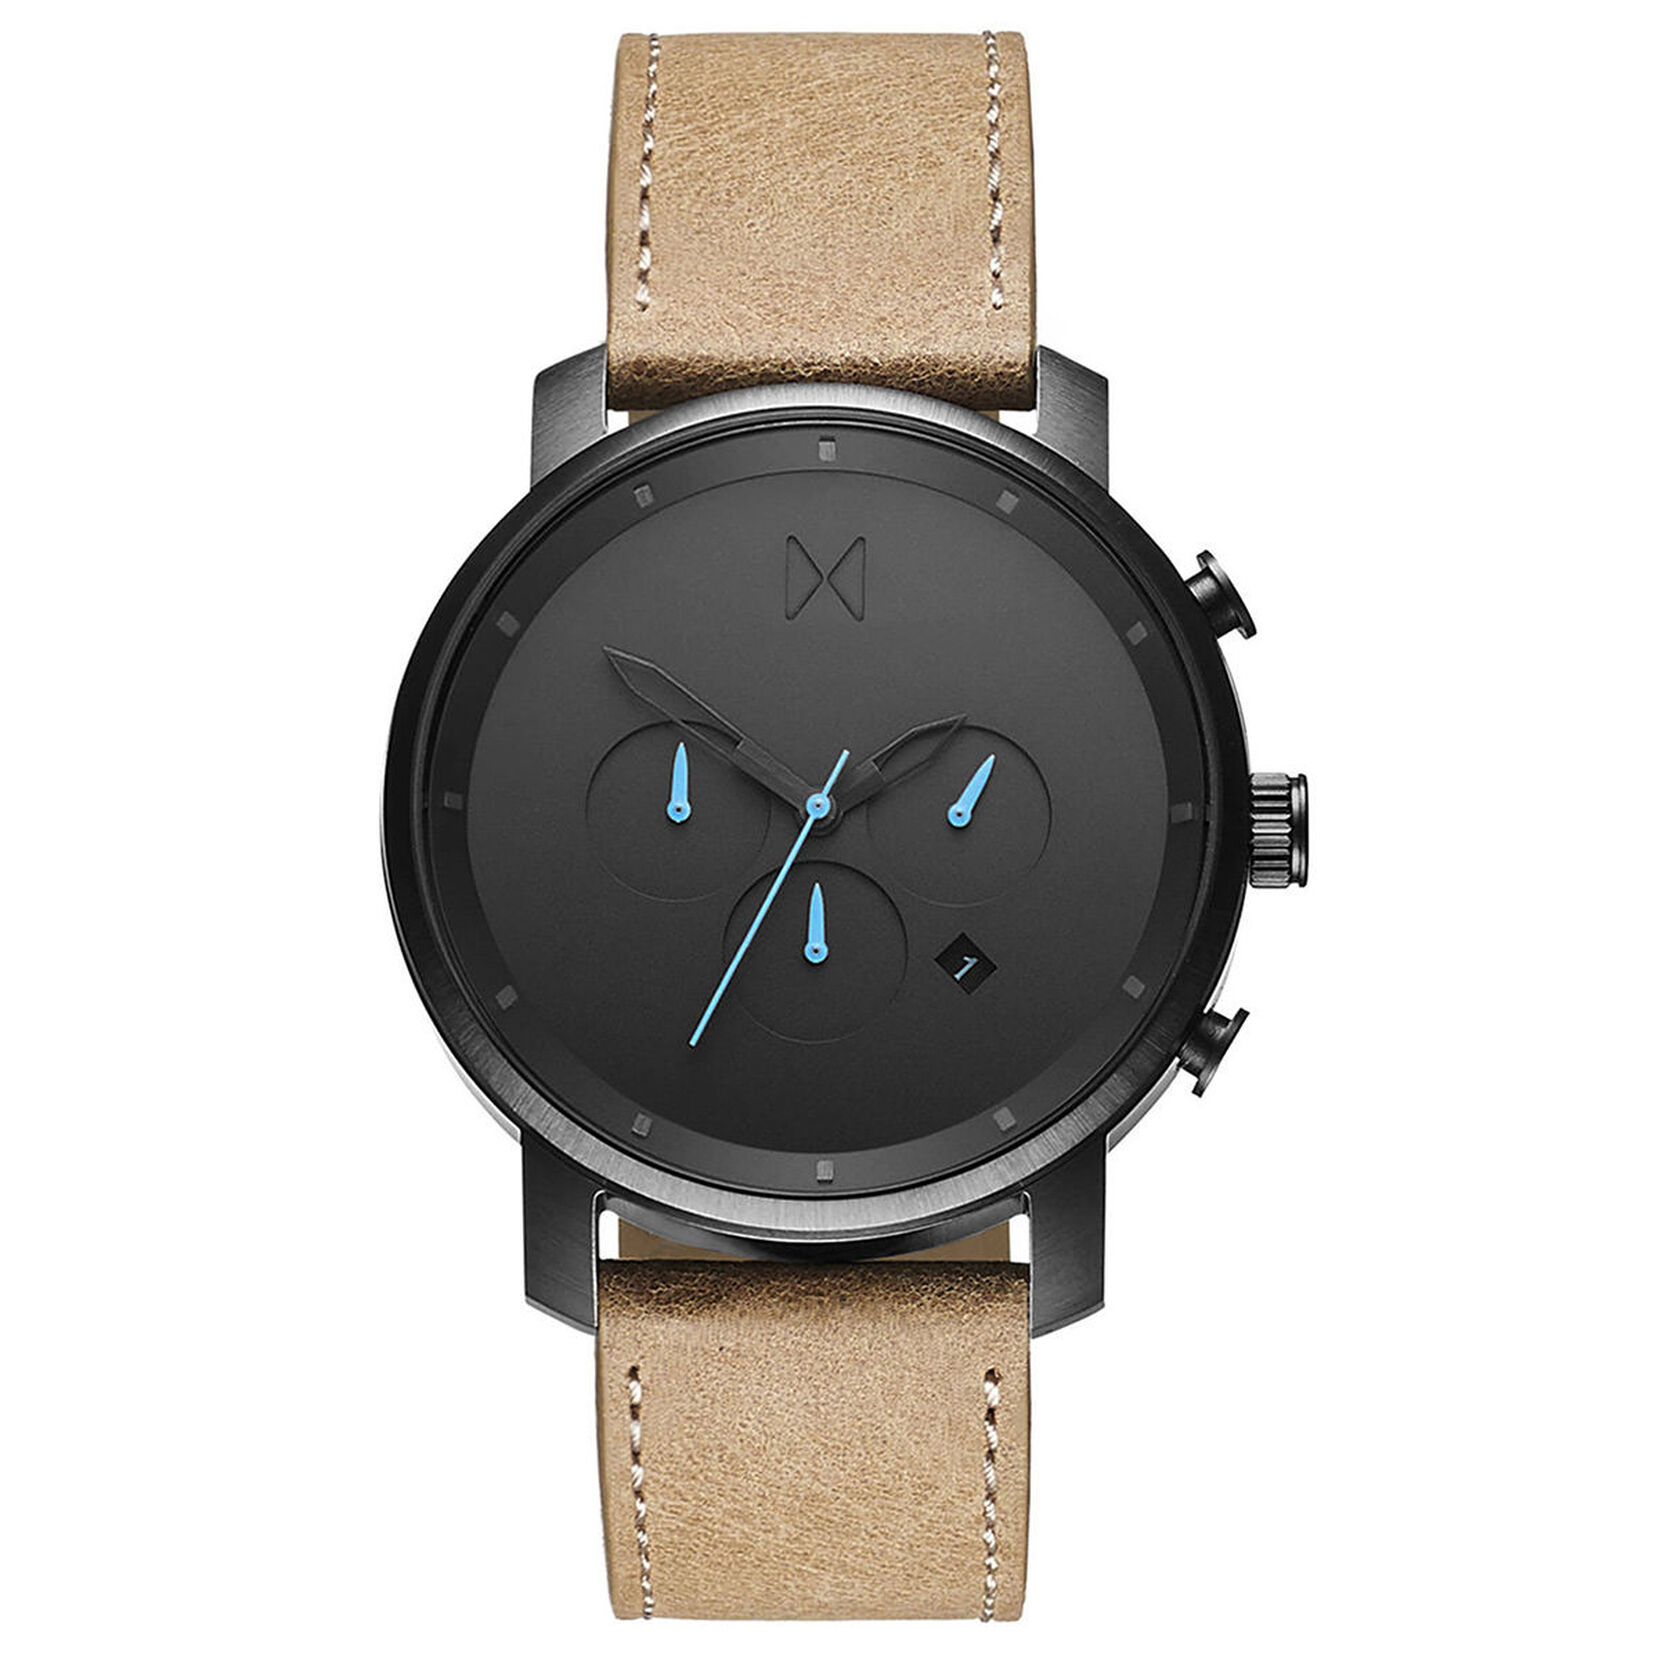 MVMT Chrono Gunmetal with leather strap, three subdials and a bright blue display